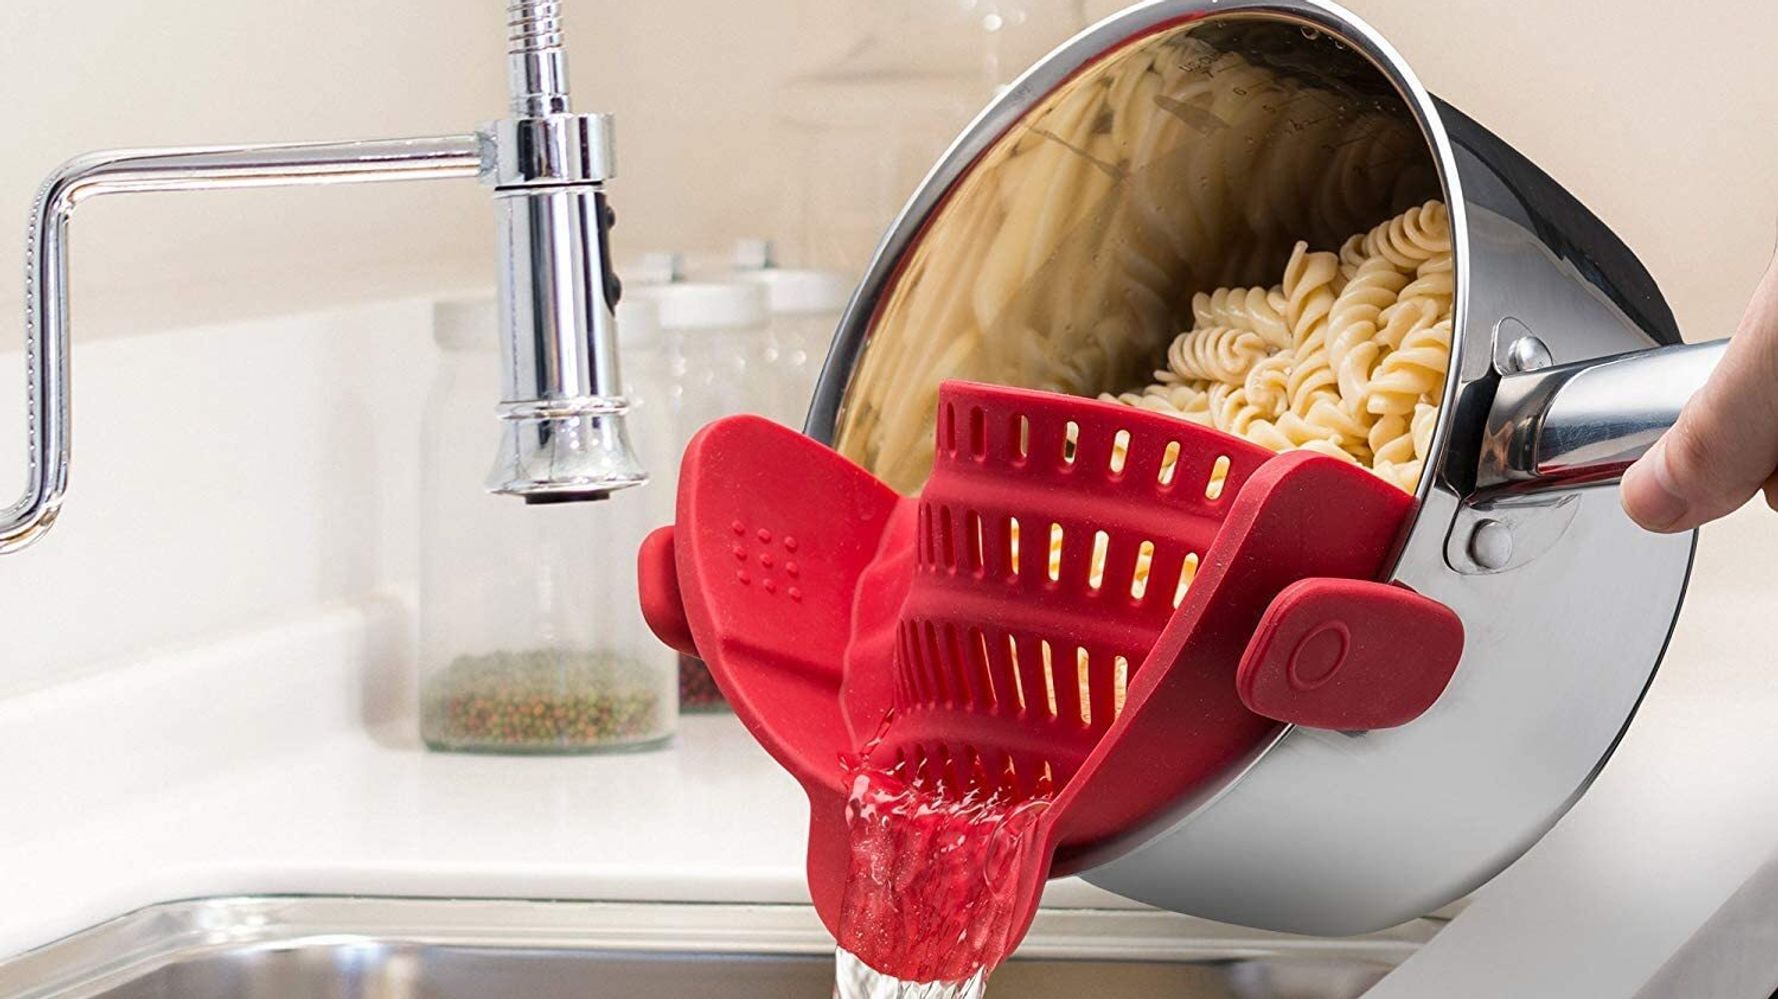 Want To Make Cooking A Bit Easier? Try Adding One Of These 18 Things To Your Kitchen